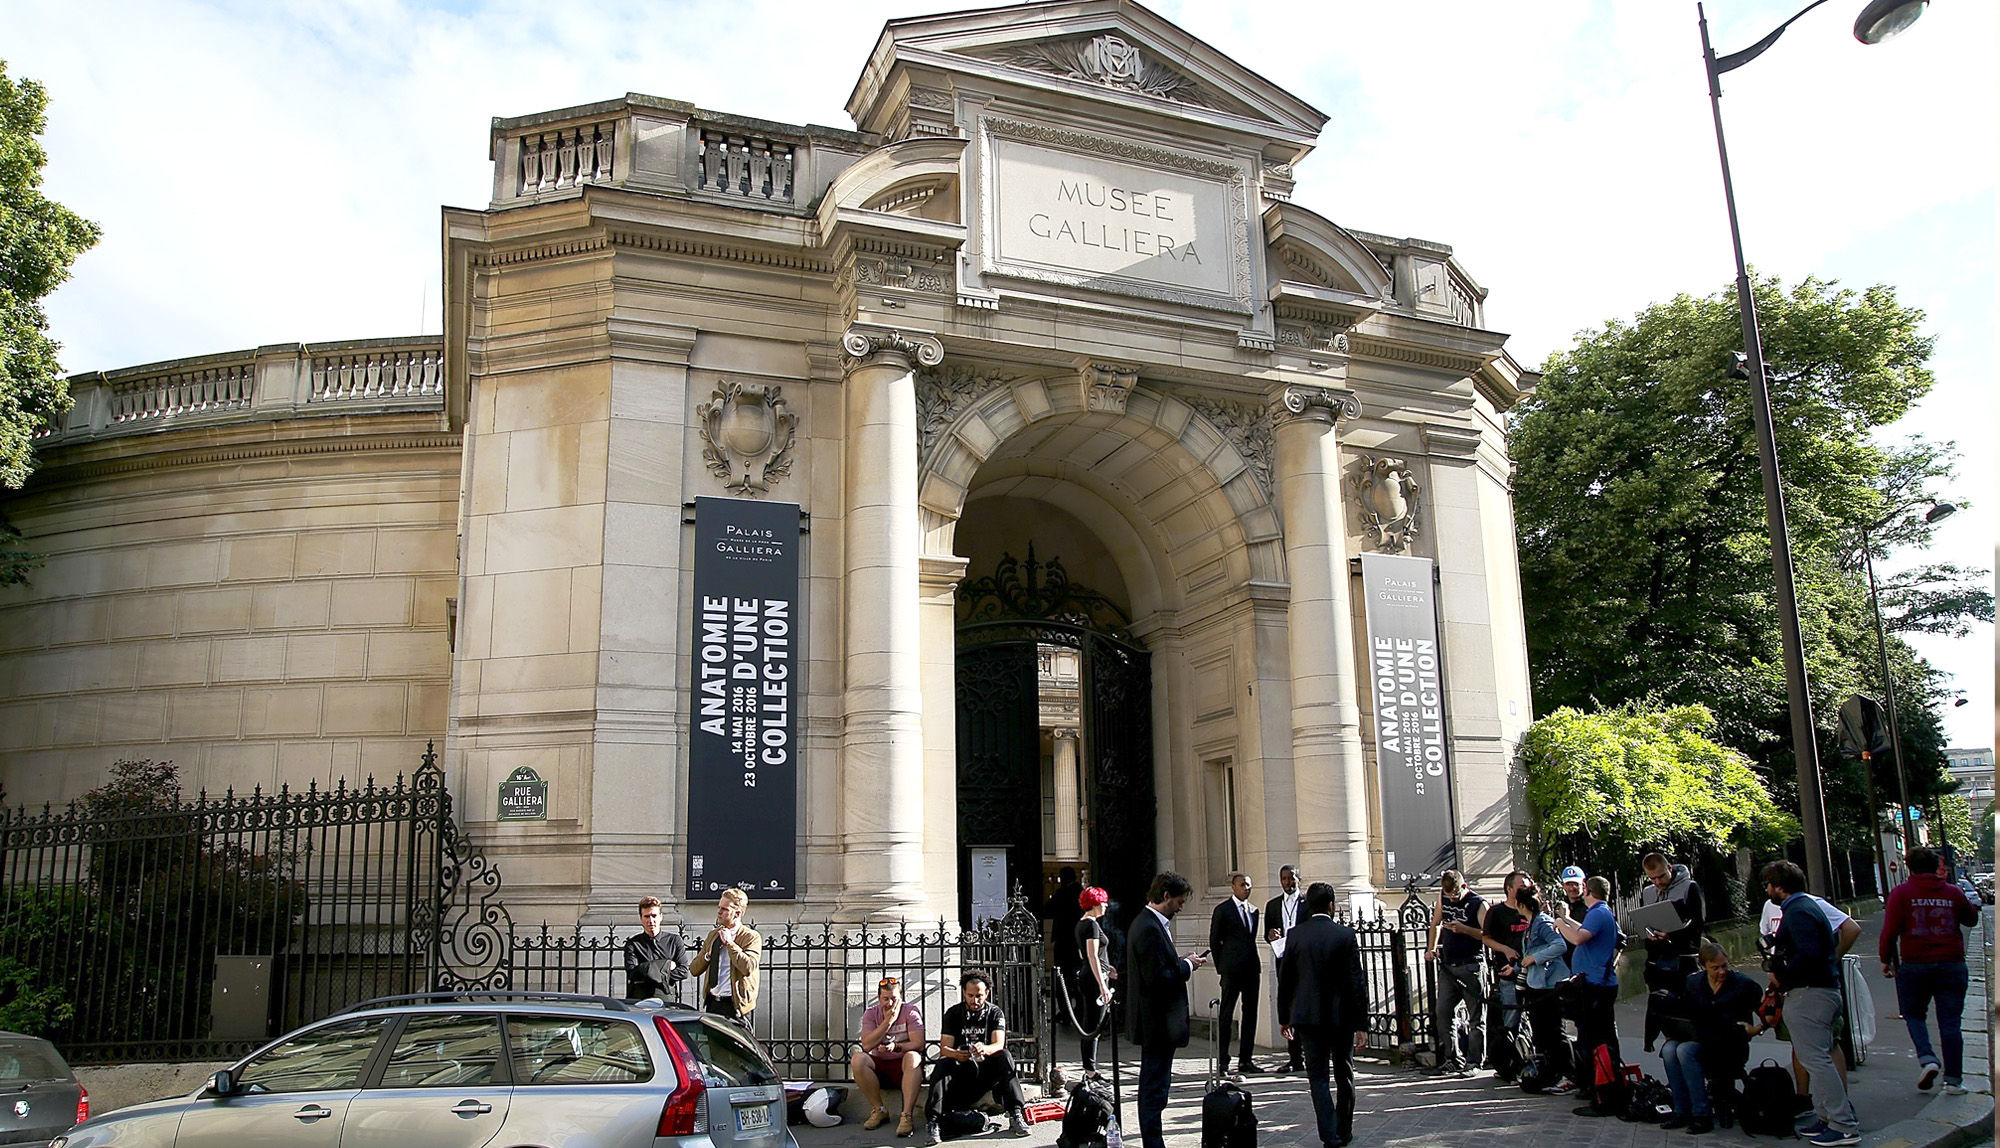 Paris’s first permanent fashion museum will open in 2019